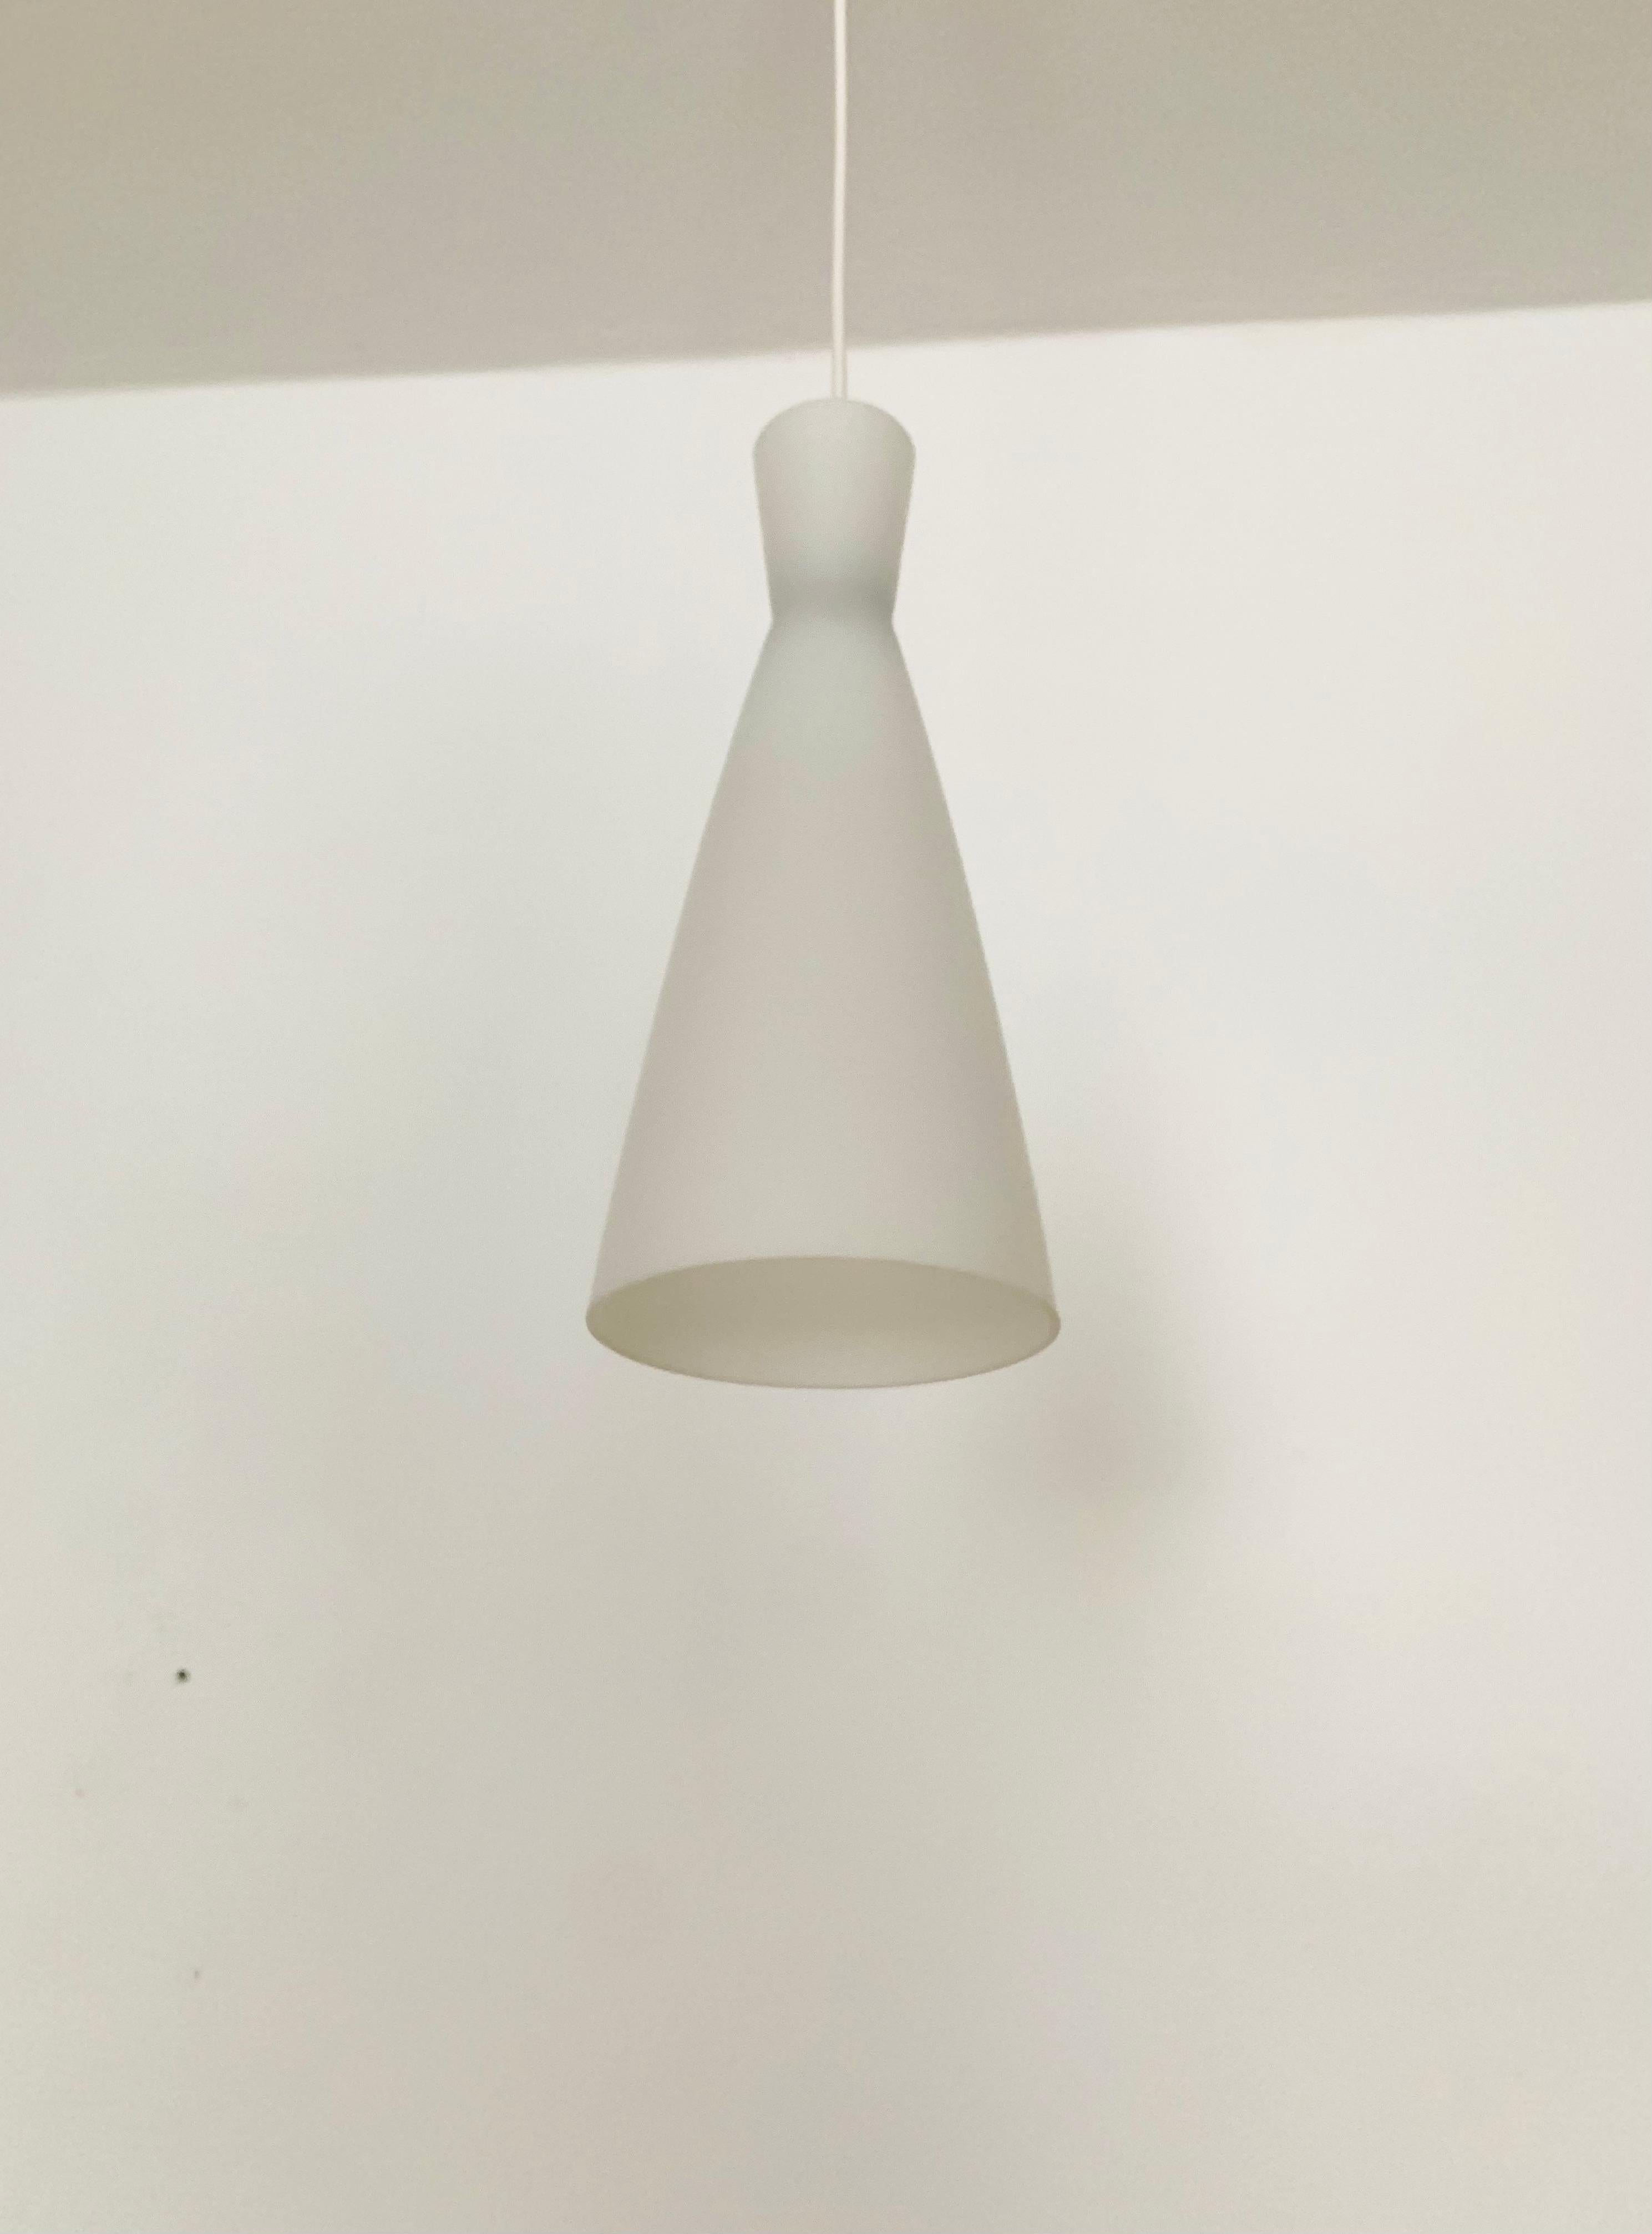 Set of 2 Diabolo Glass Pendant Lamps by Aloys Gangkofner for Peill and Putzler In Good Condition For Sale In München, DE